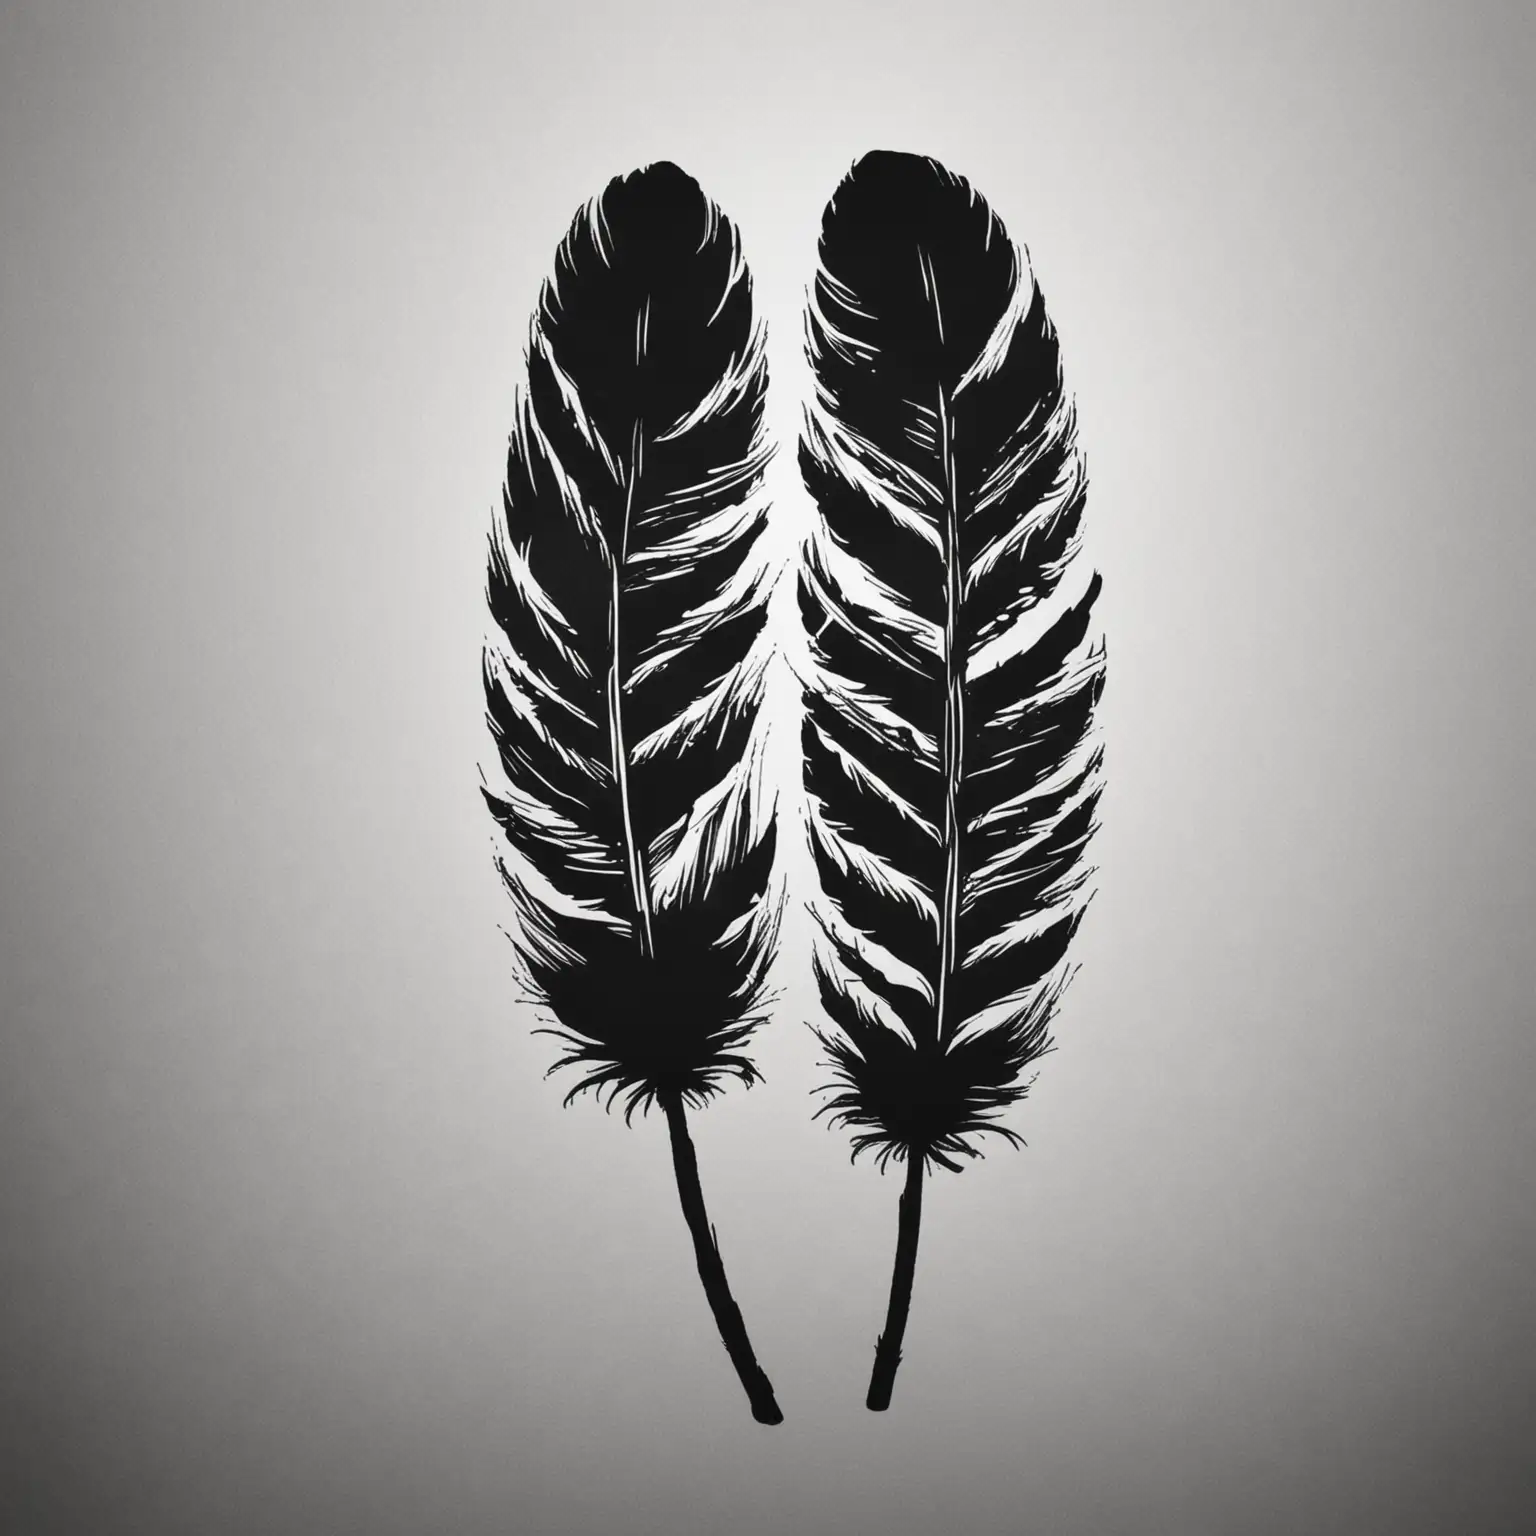 stencil, minimalist, simple, vector art, black and white, silhouette, negative space, feather
